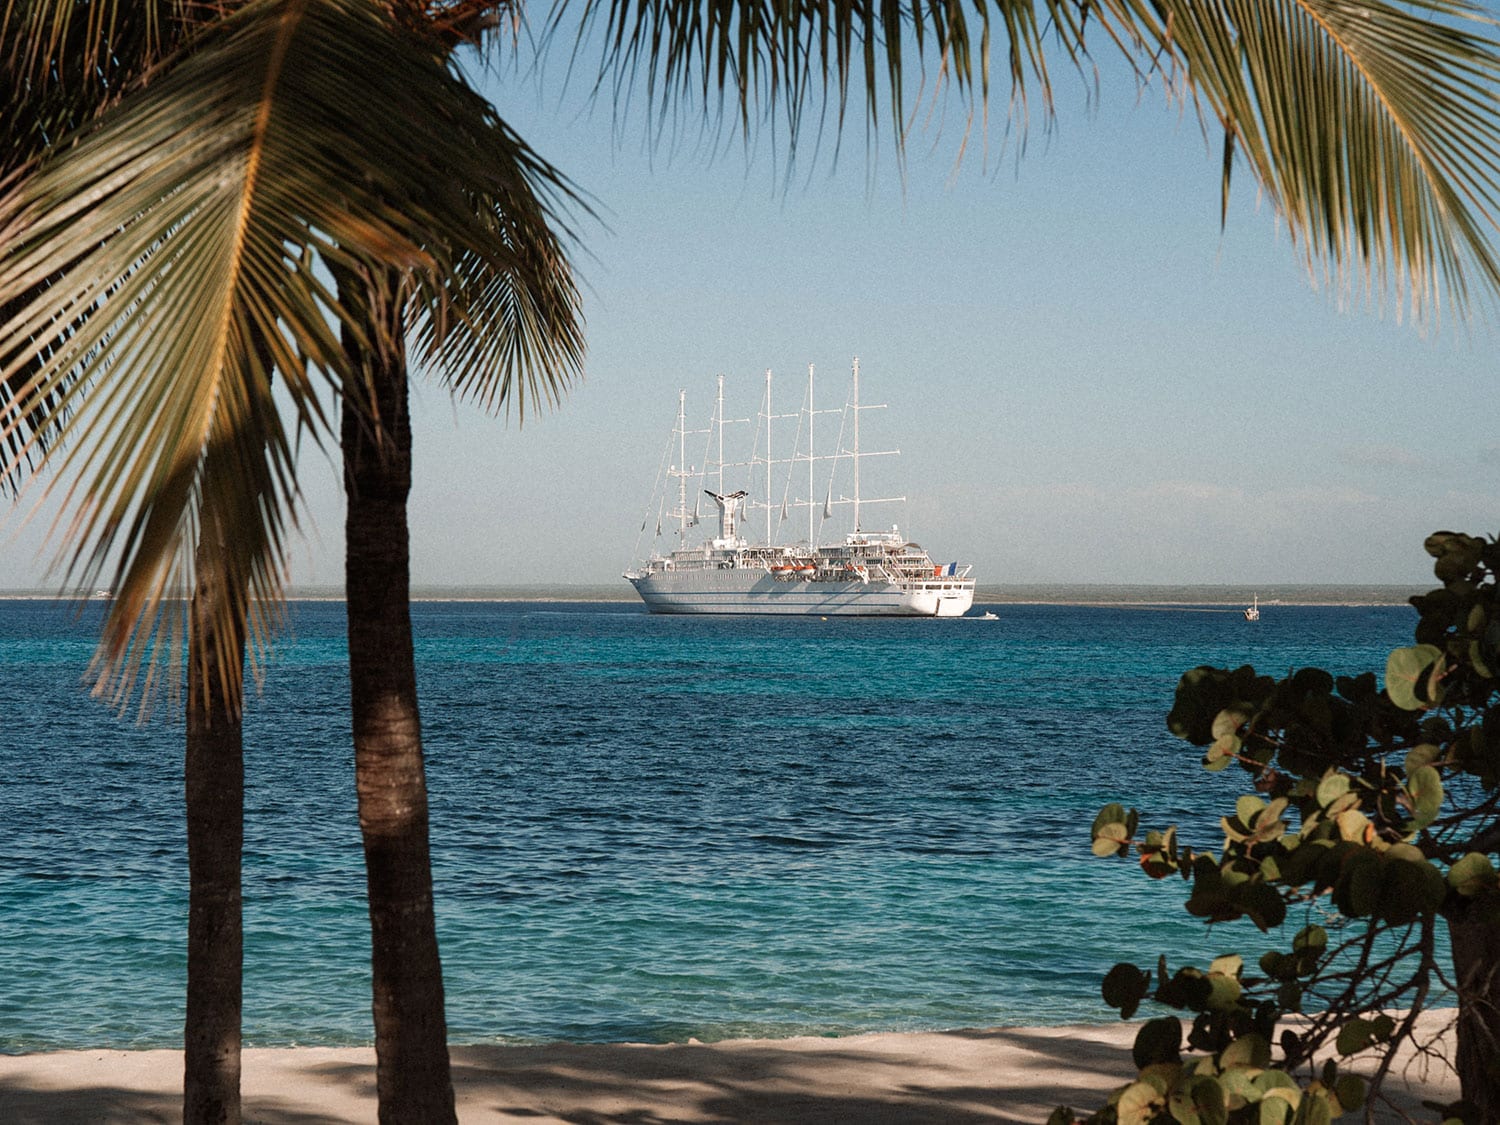 A view of the Club Med 2 luxury sailing yacht from a beach.